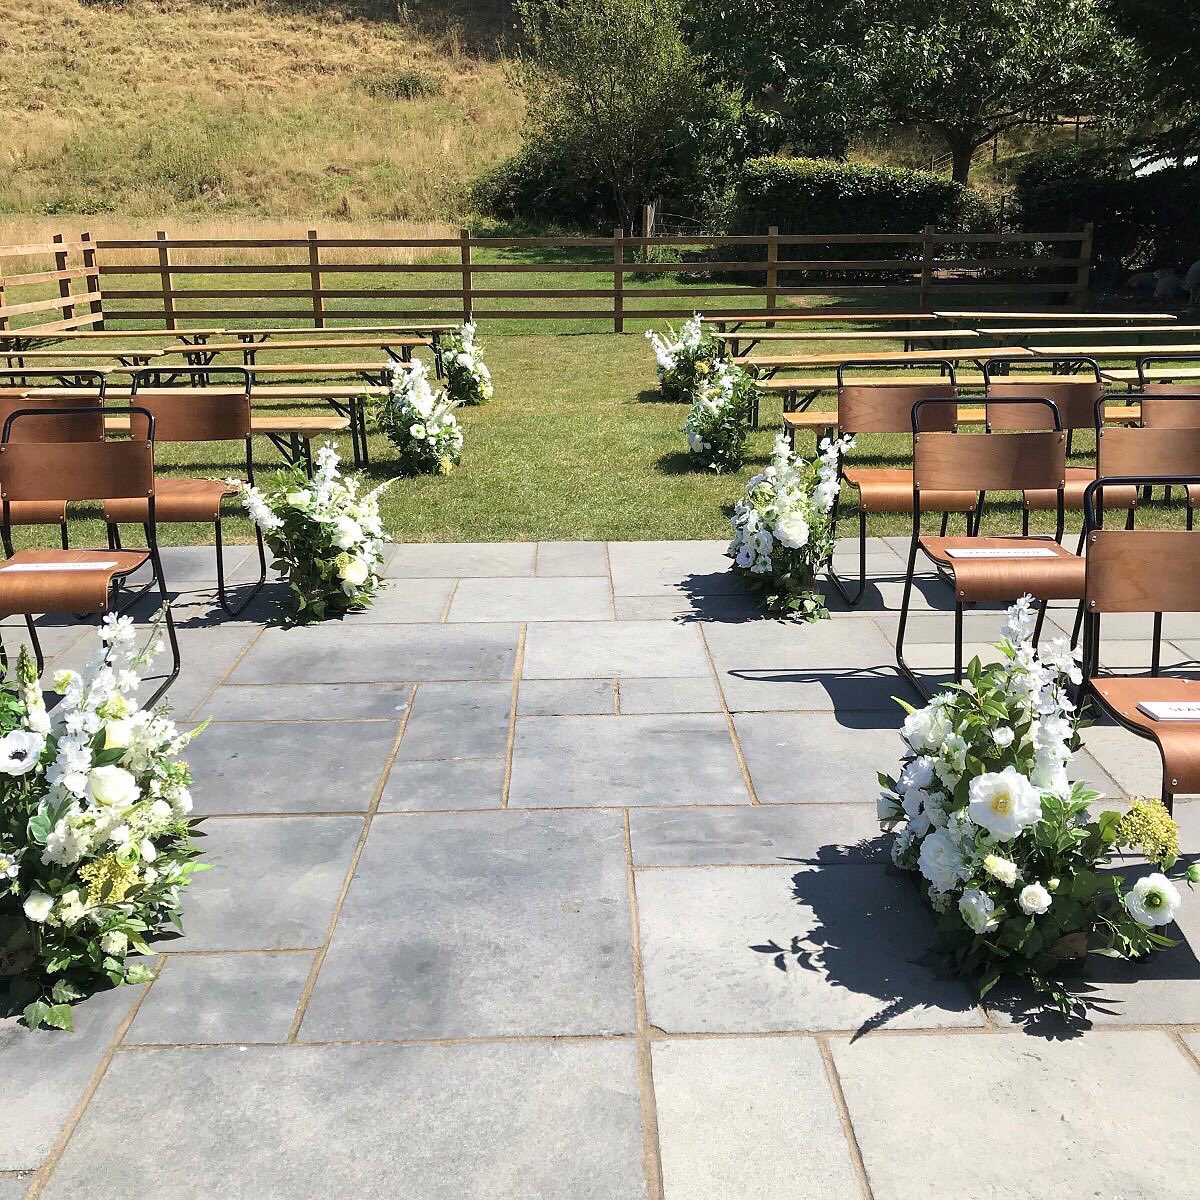 🌸OUTDOOR CEREMONY🌸If you have over 90 guests and would like to get married amongst the rolling hills of the Devon countryside we can transform the terrace into a beautiful ceremony space.
#devonweddings #outdoorweddingceremony #devonweddingvenue #aisledecor #aislestyle